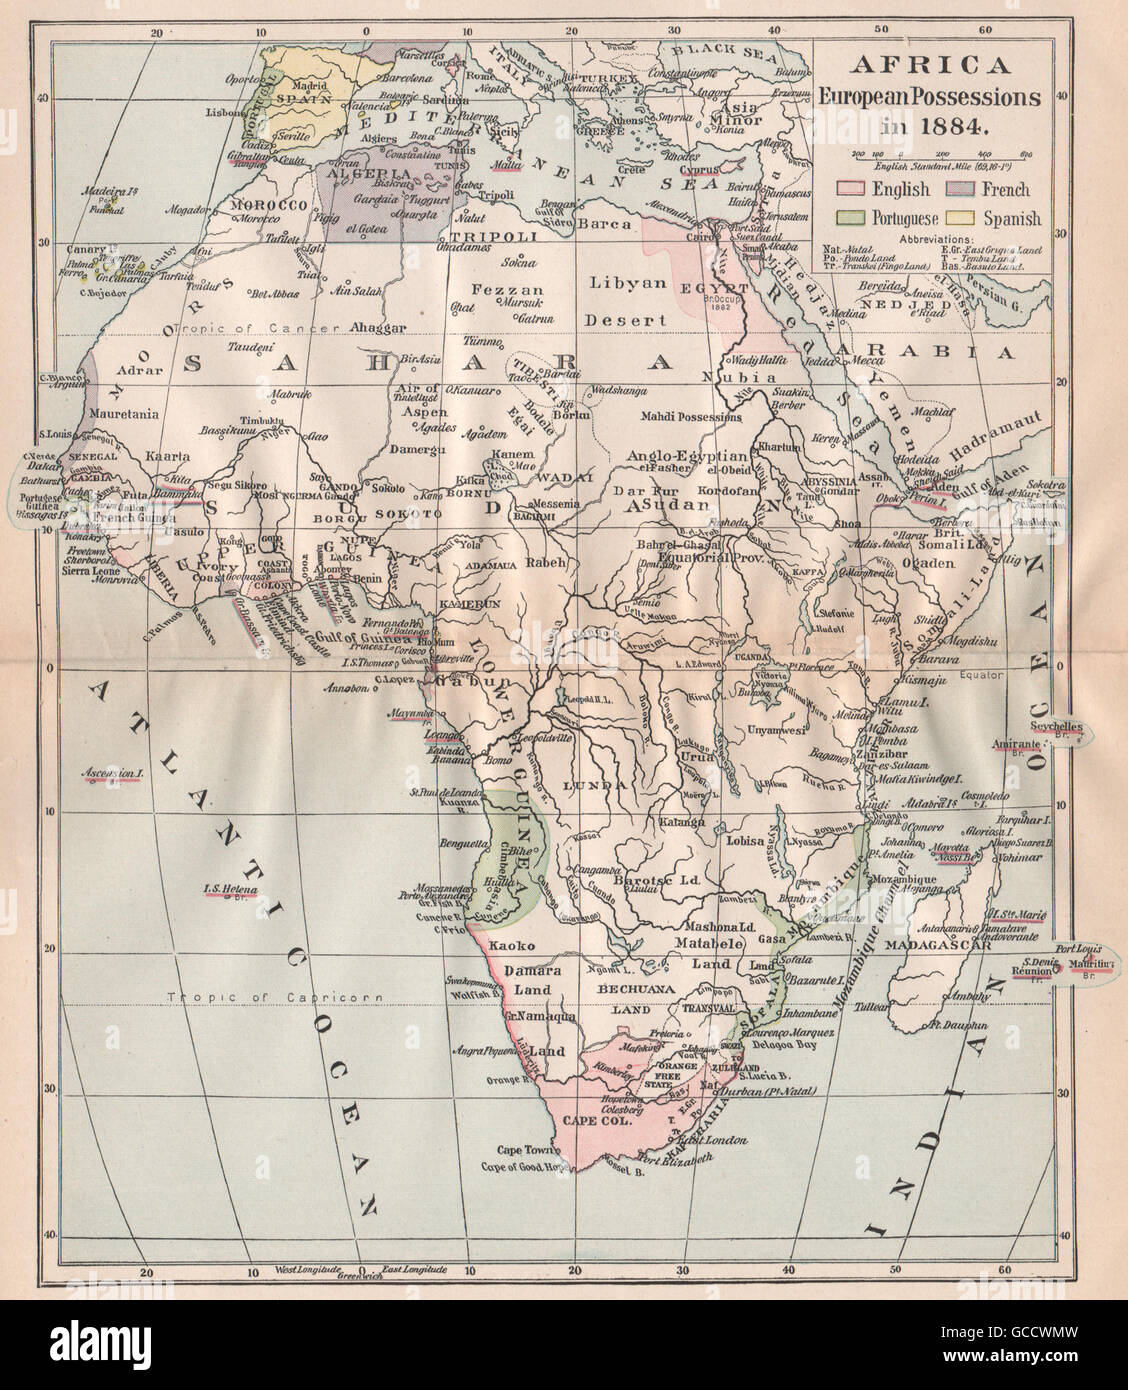 Africa 1884 European Possessions Colonies English French Portuguese